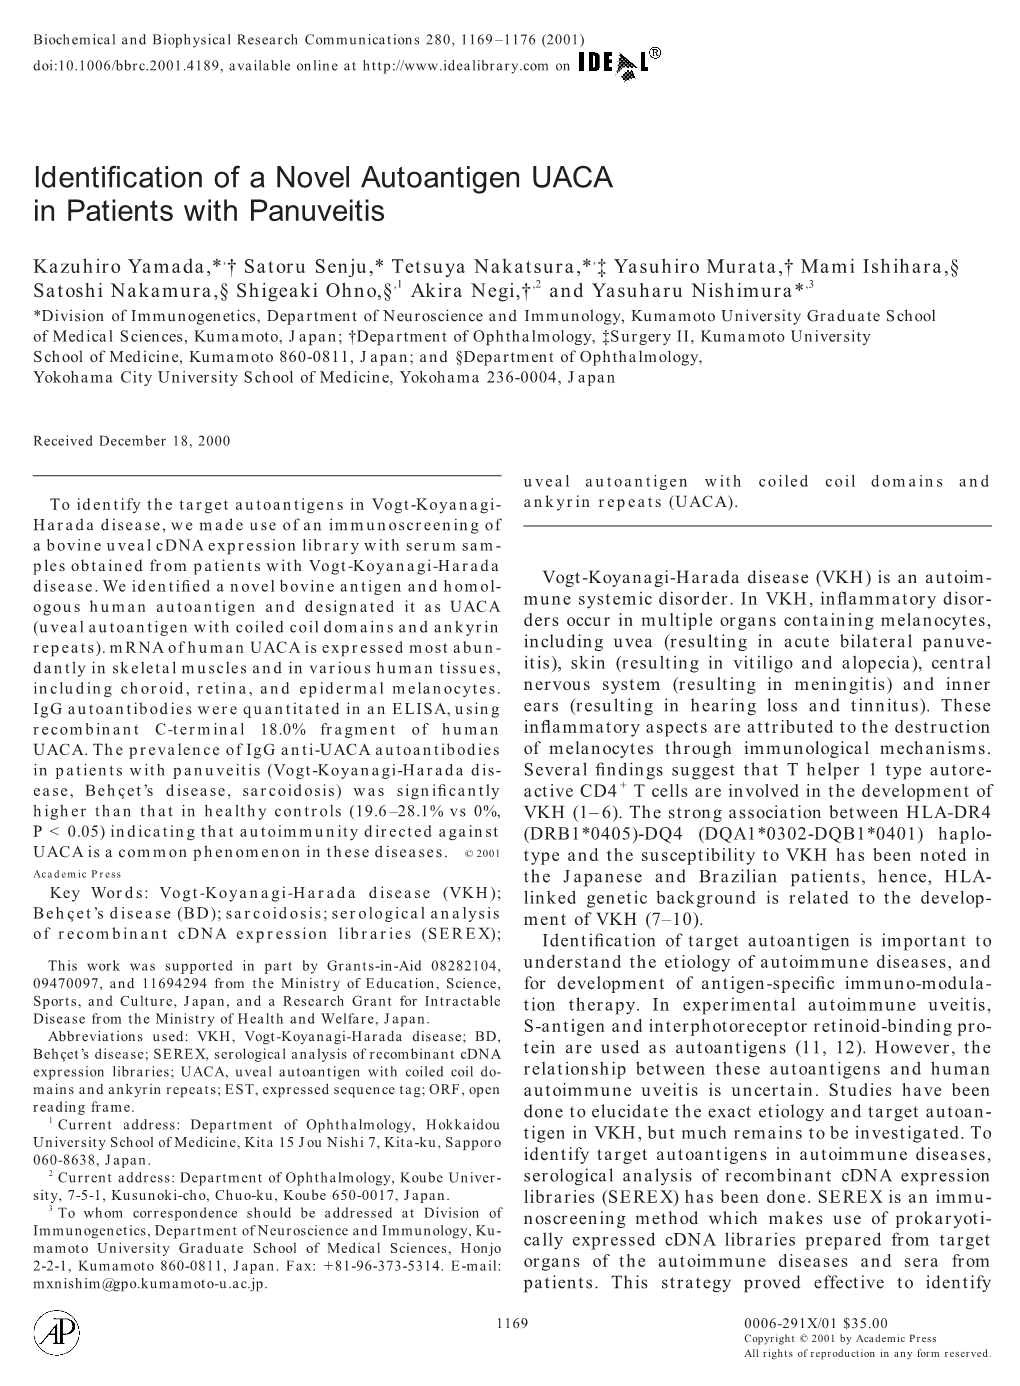 Identification of a Novel Autoantigen UACA in Patients with Panuveitis